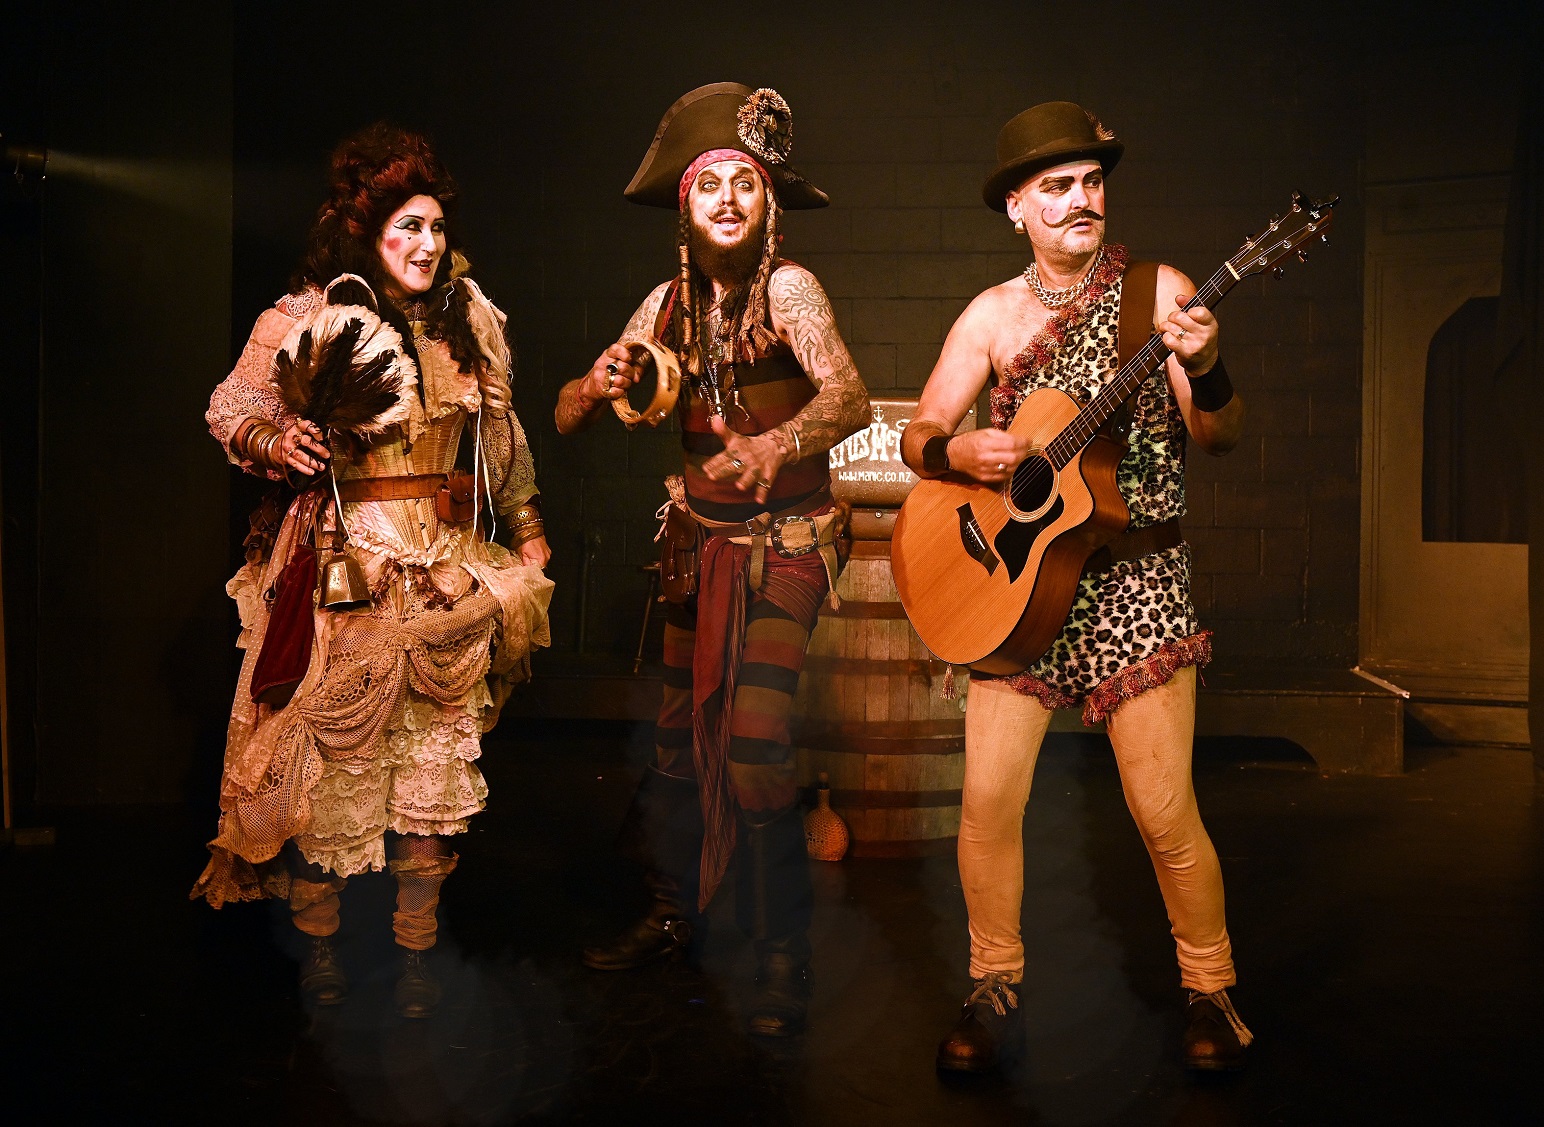 Performers (from left) Larissa Lofley as Miss Lucy Drawers, Rich Manic as Captain Festus McBoyle,...